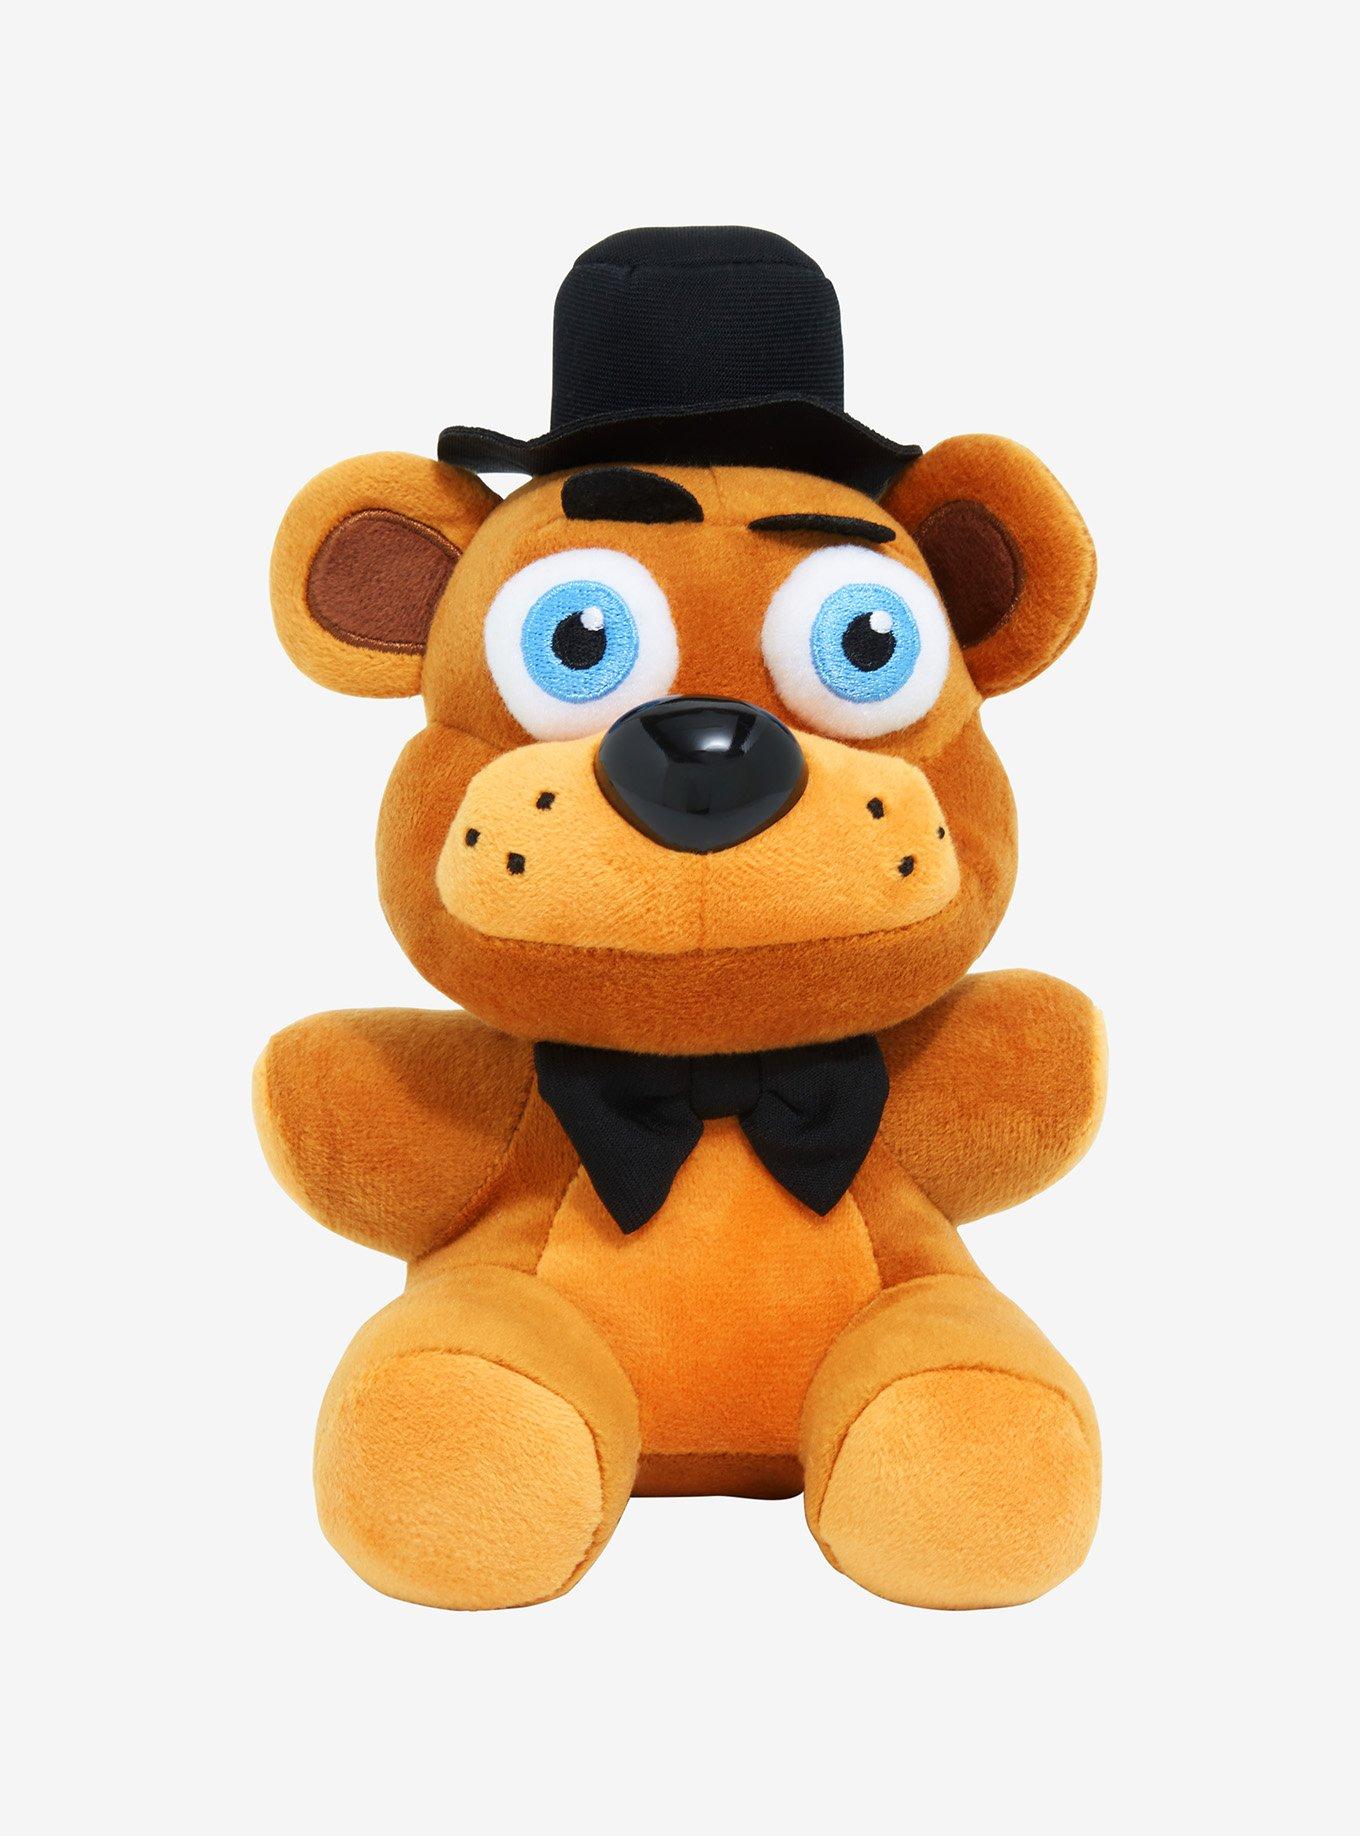 New FNAF Five Nights at Freddy's Collector Golden Freddy Doll Plush Toy HOT